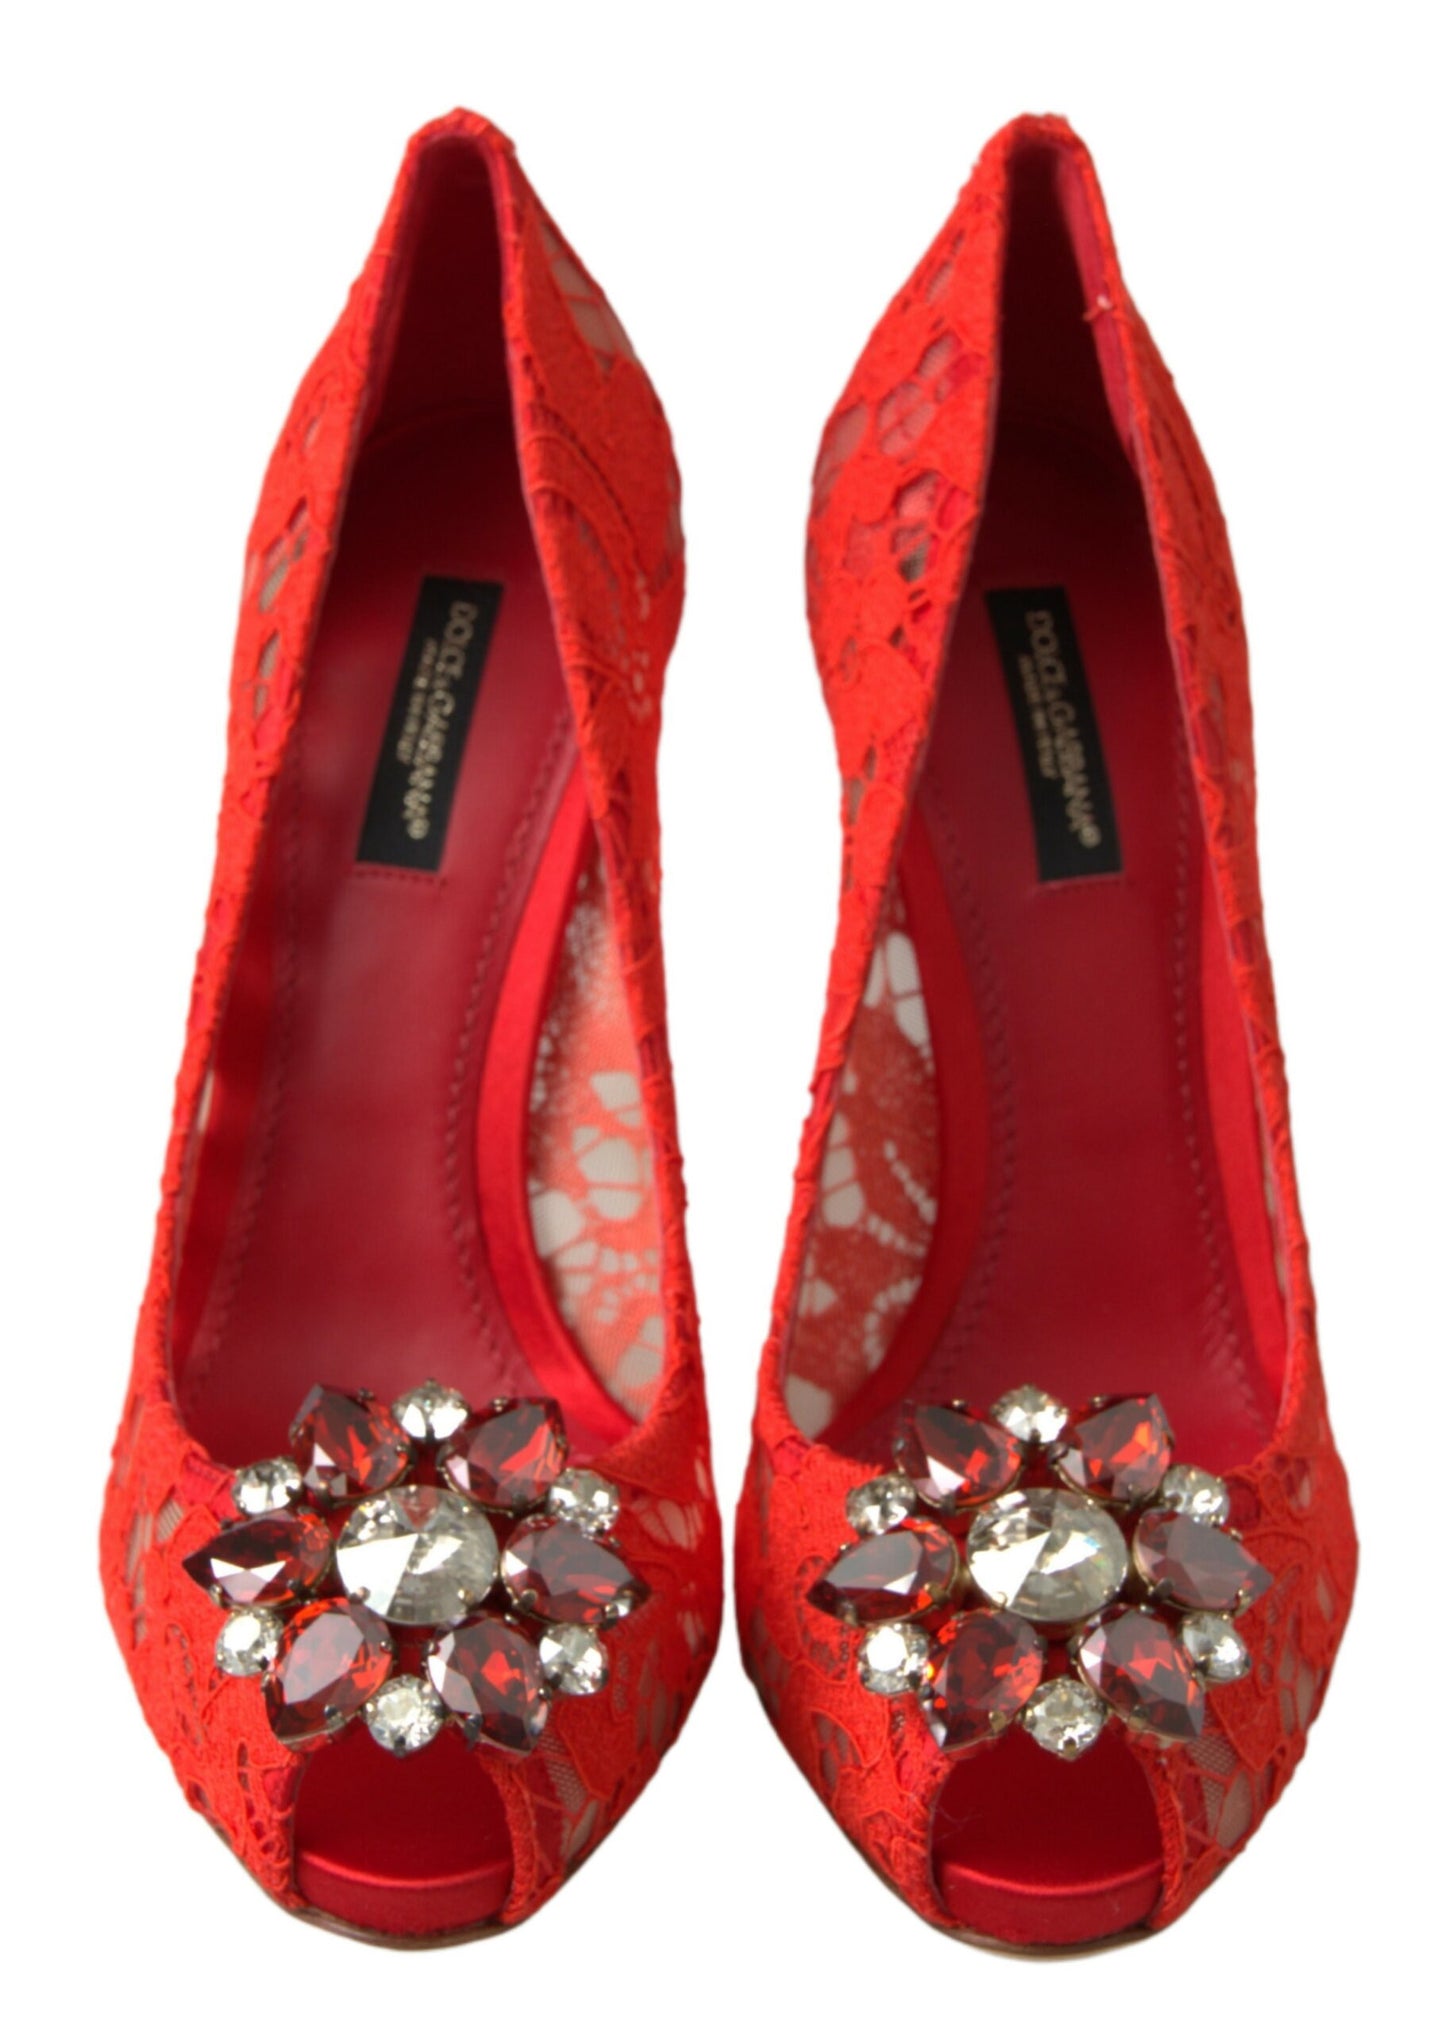 Chic Red Lace Heels with Crystal Embellishment